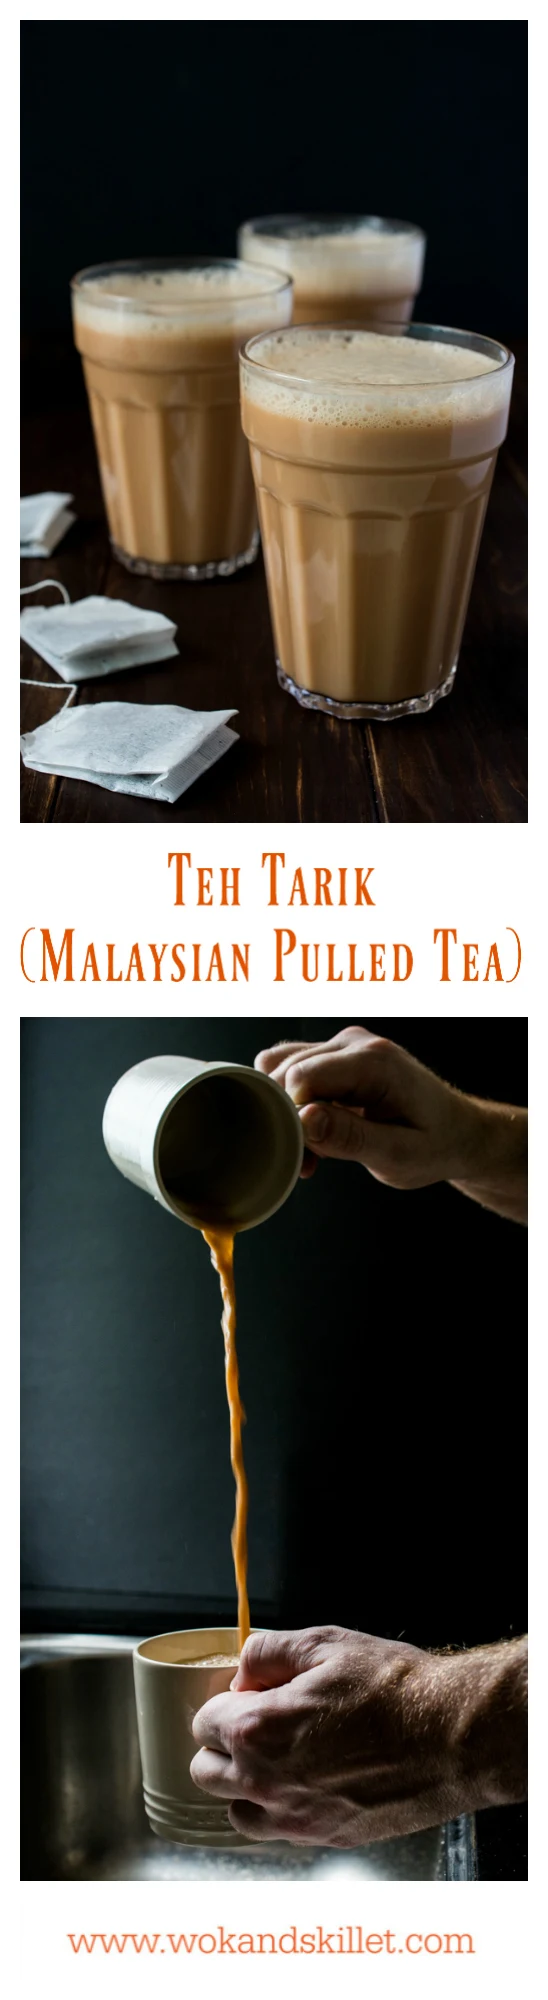 Teh Tarik (literally translated "Pulled Tea") is a rich and creamy tea that originated in Malaysia and is gaining popularity all over the world. The tea is skillfully poured from one jug to another to create the magical froth on the top. 